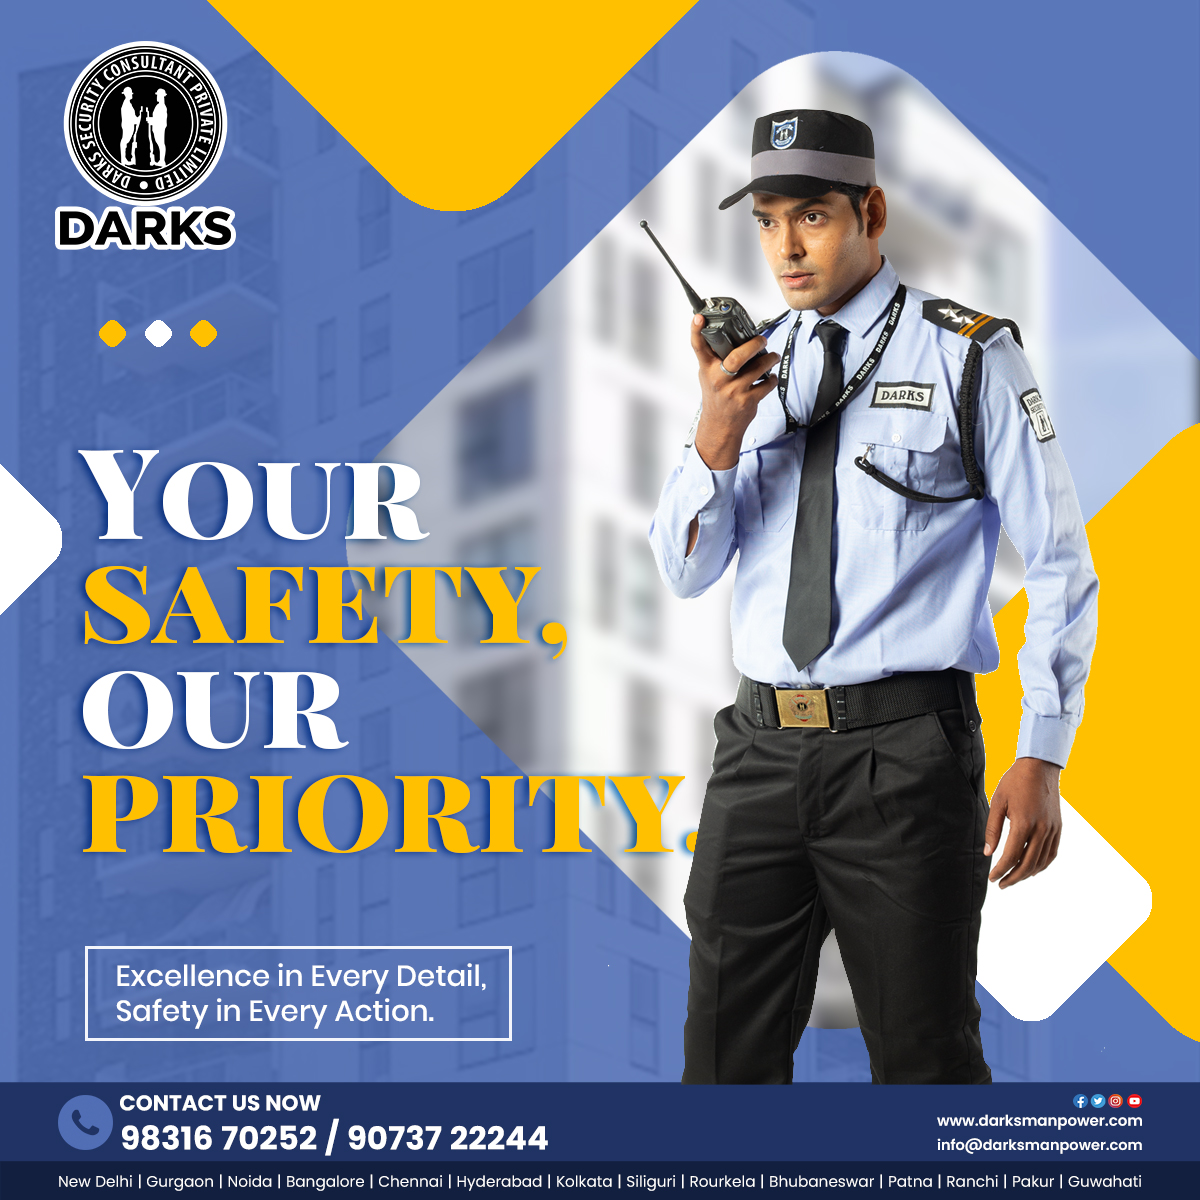 Prioritizing your safety as one of our primary purposes. Get in touch now !!

#securityguards #securitycompany #securityservices #security #darkssecurity #bestsecuritycompany